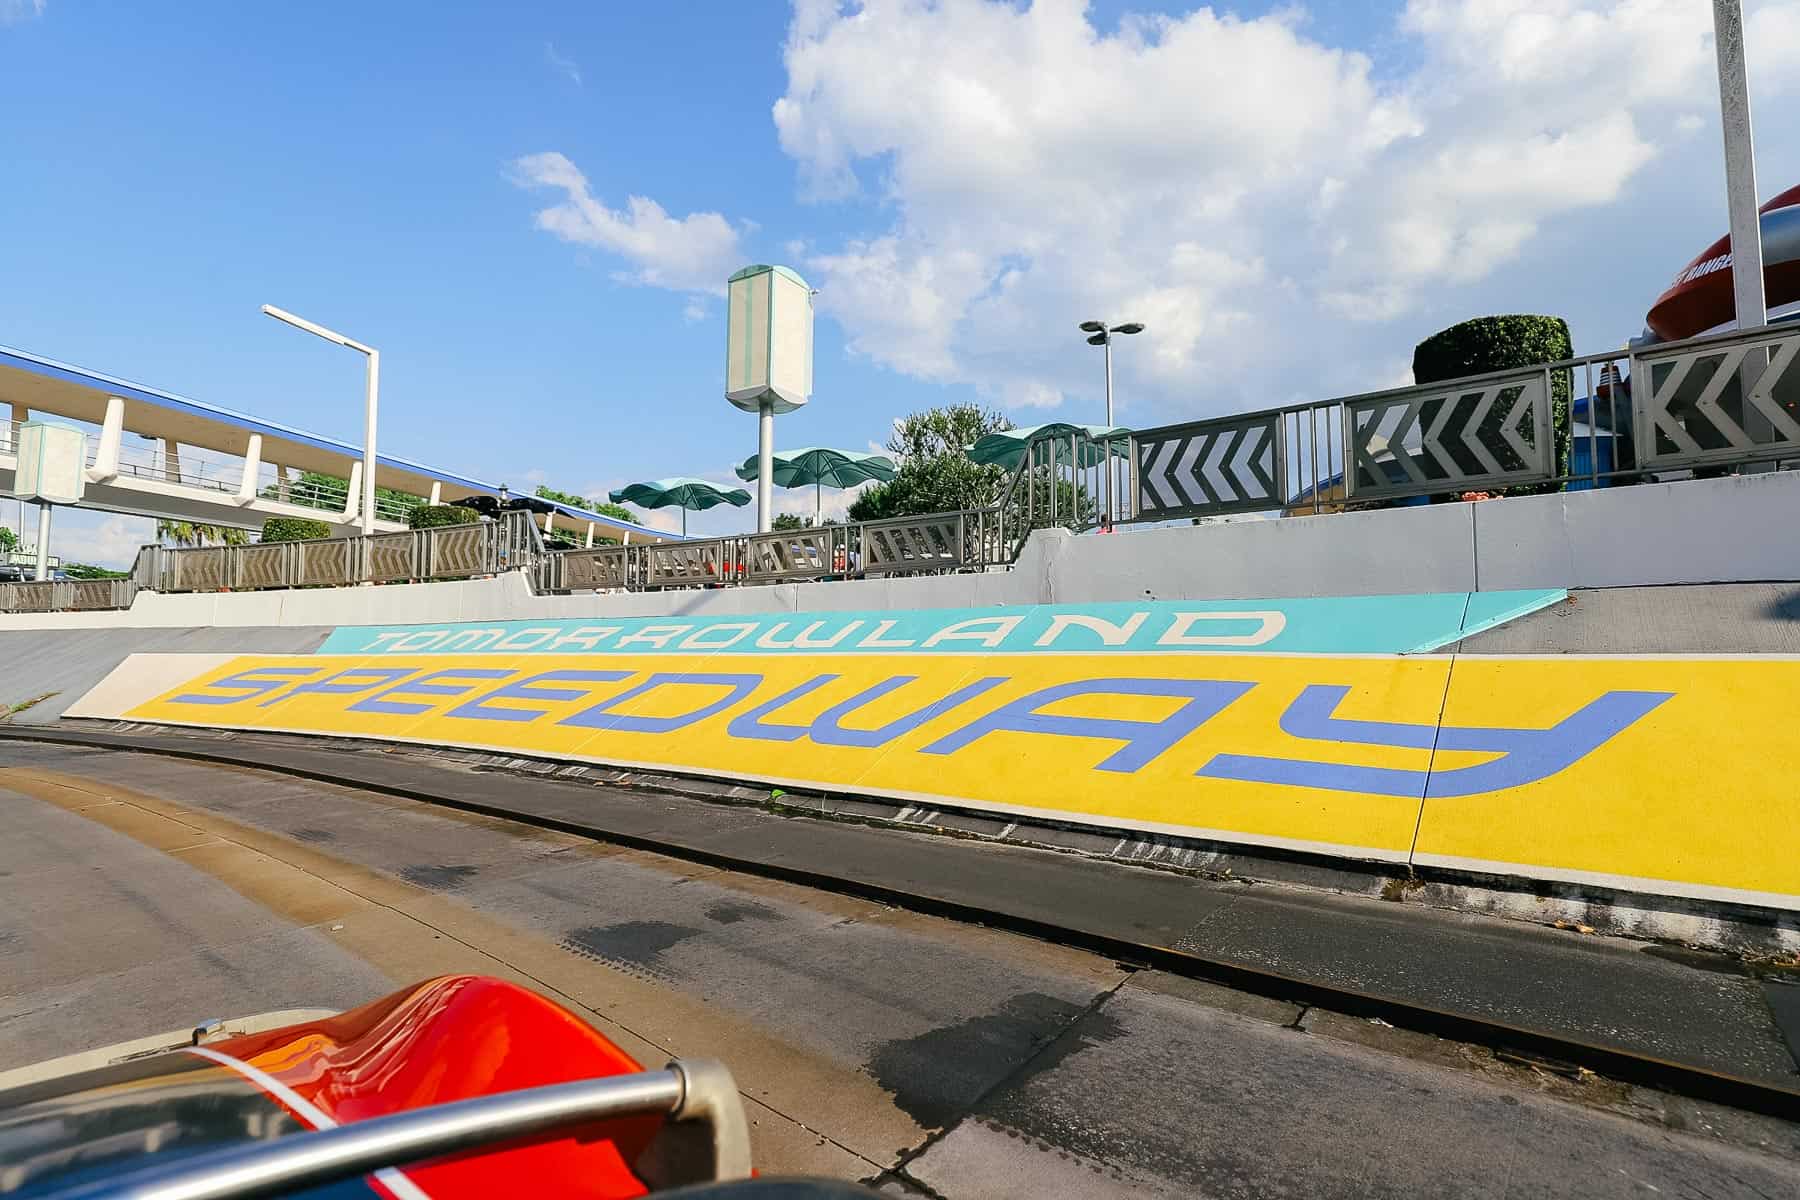 Tomorrowland Speedway painted in the curve of the race track. 